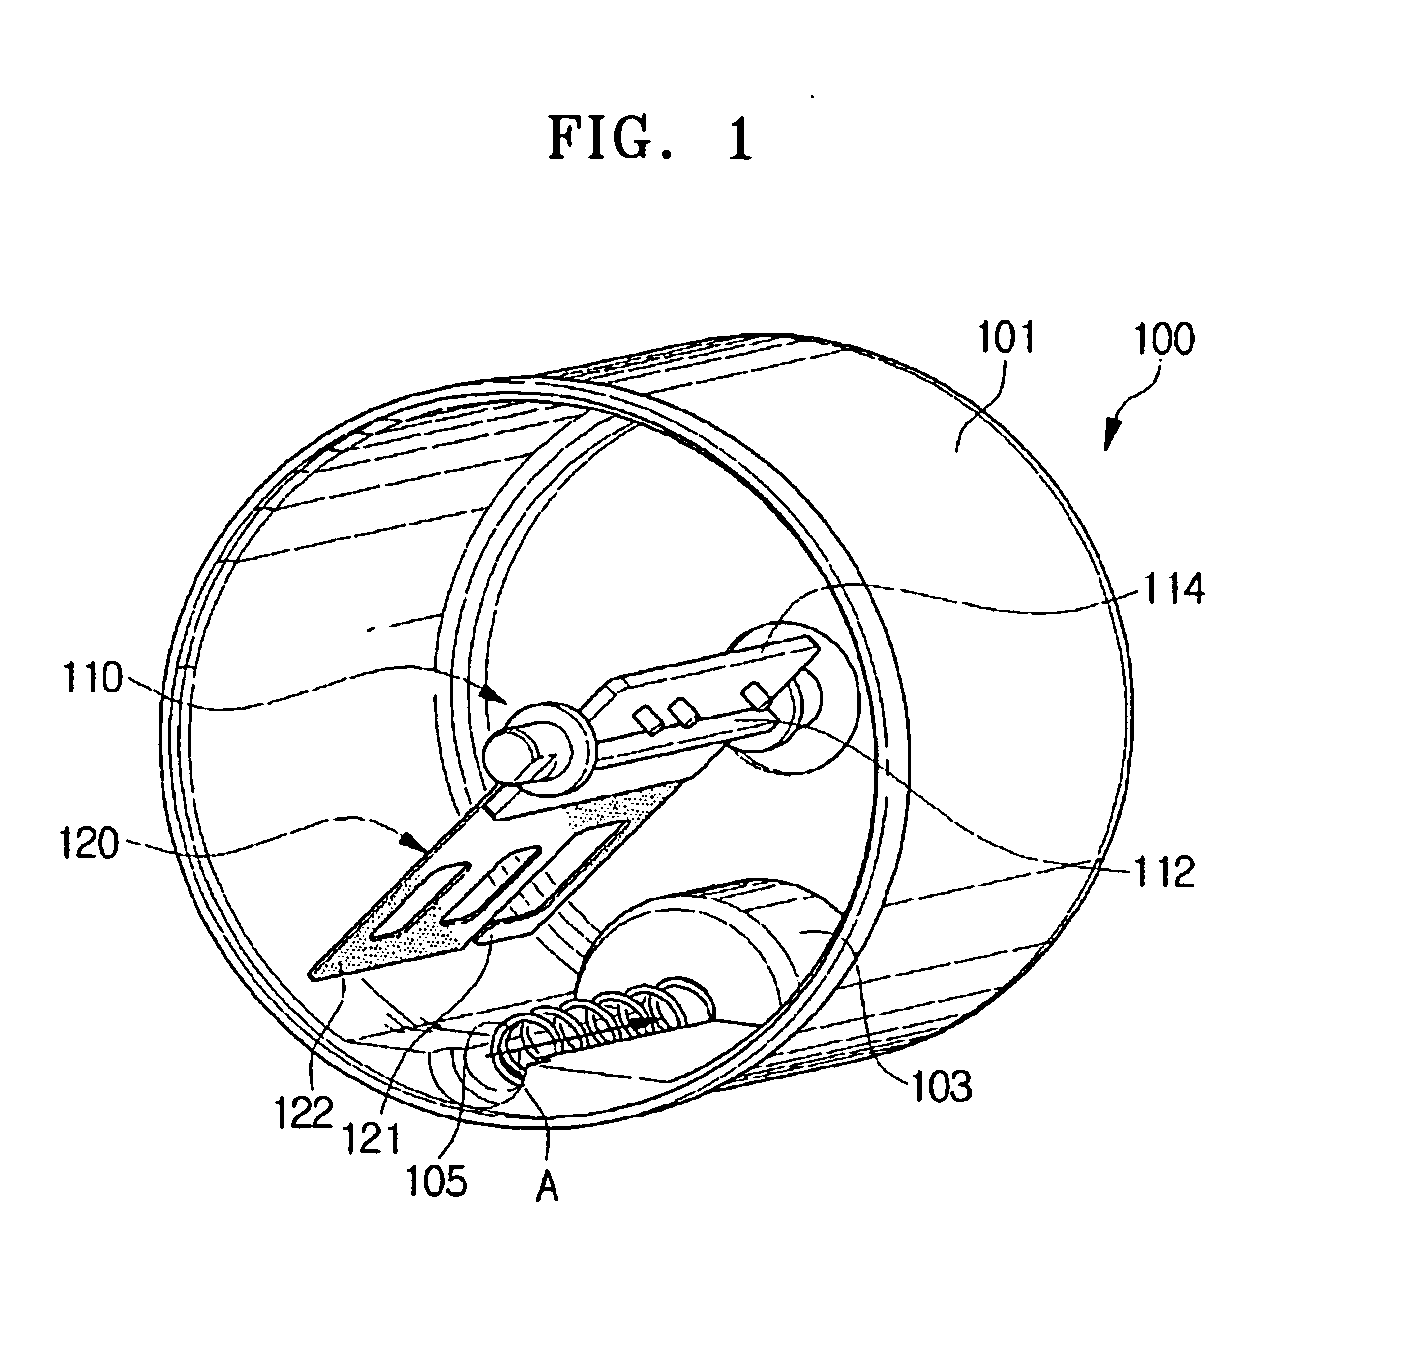 Toner for developing electrostatic image and method of preparing the same